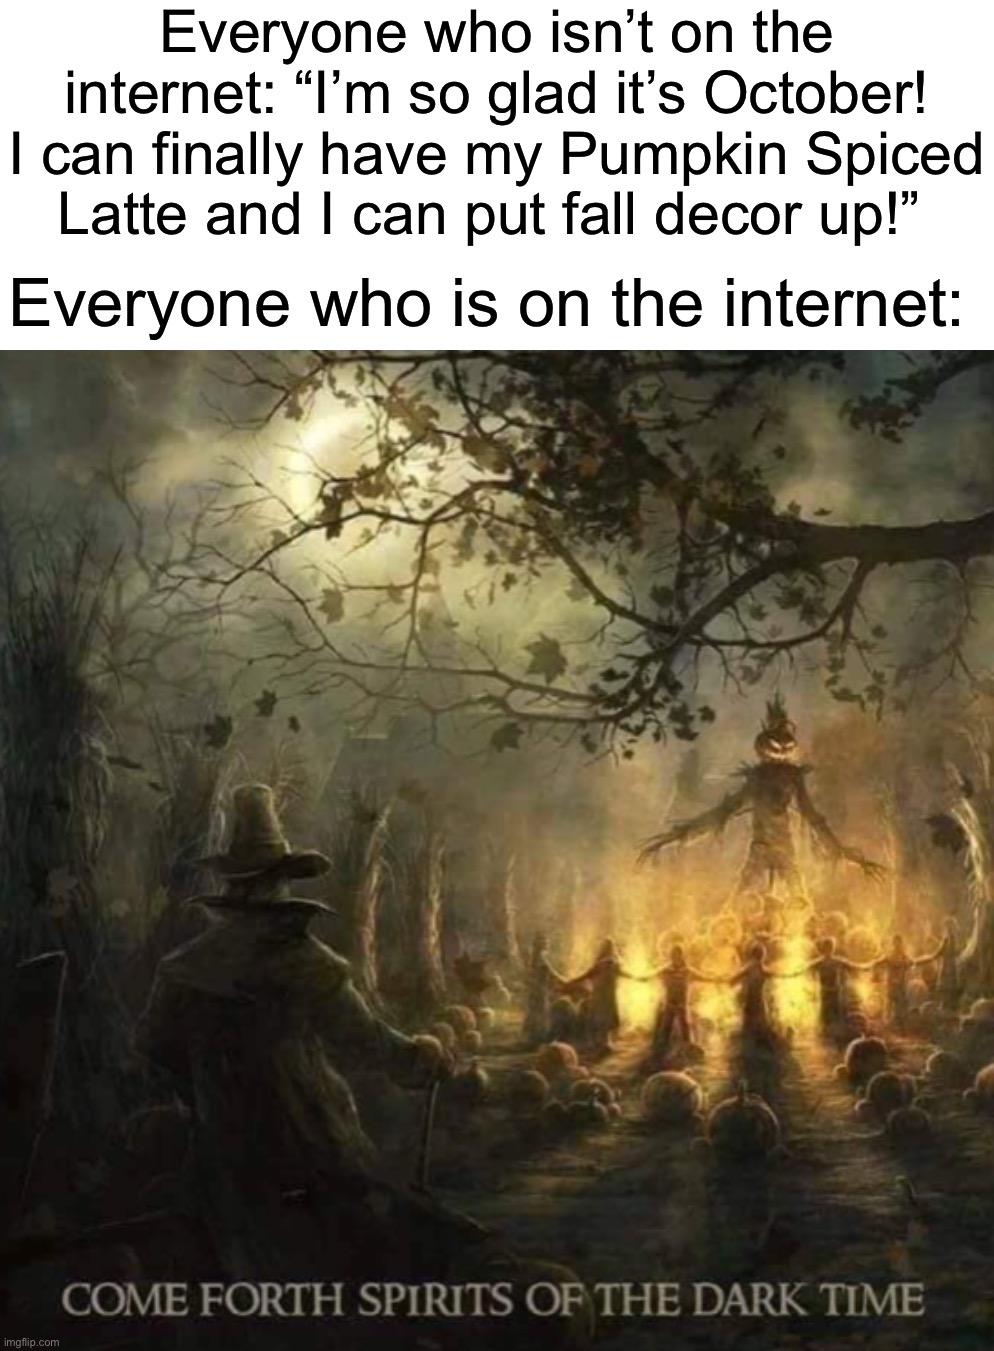 Spooky month ☠️☠️ |  Everyone who isn’t on the internet: “I’m so glad it’s October! I can finally have my Pumpkin Spiced Latte and I can put fall decor up!”; Everyone who is on the internet: | image tagged in memes,funny,spooky month,halloween,october,spooky memes | made w/ Imgflip meme maker